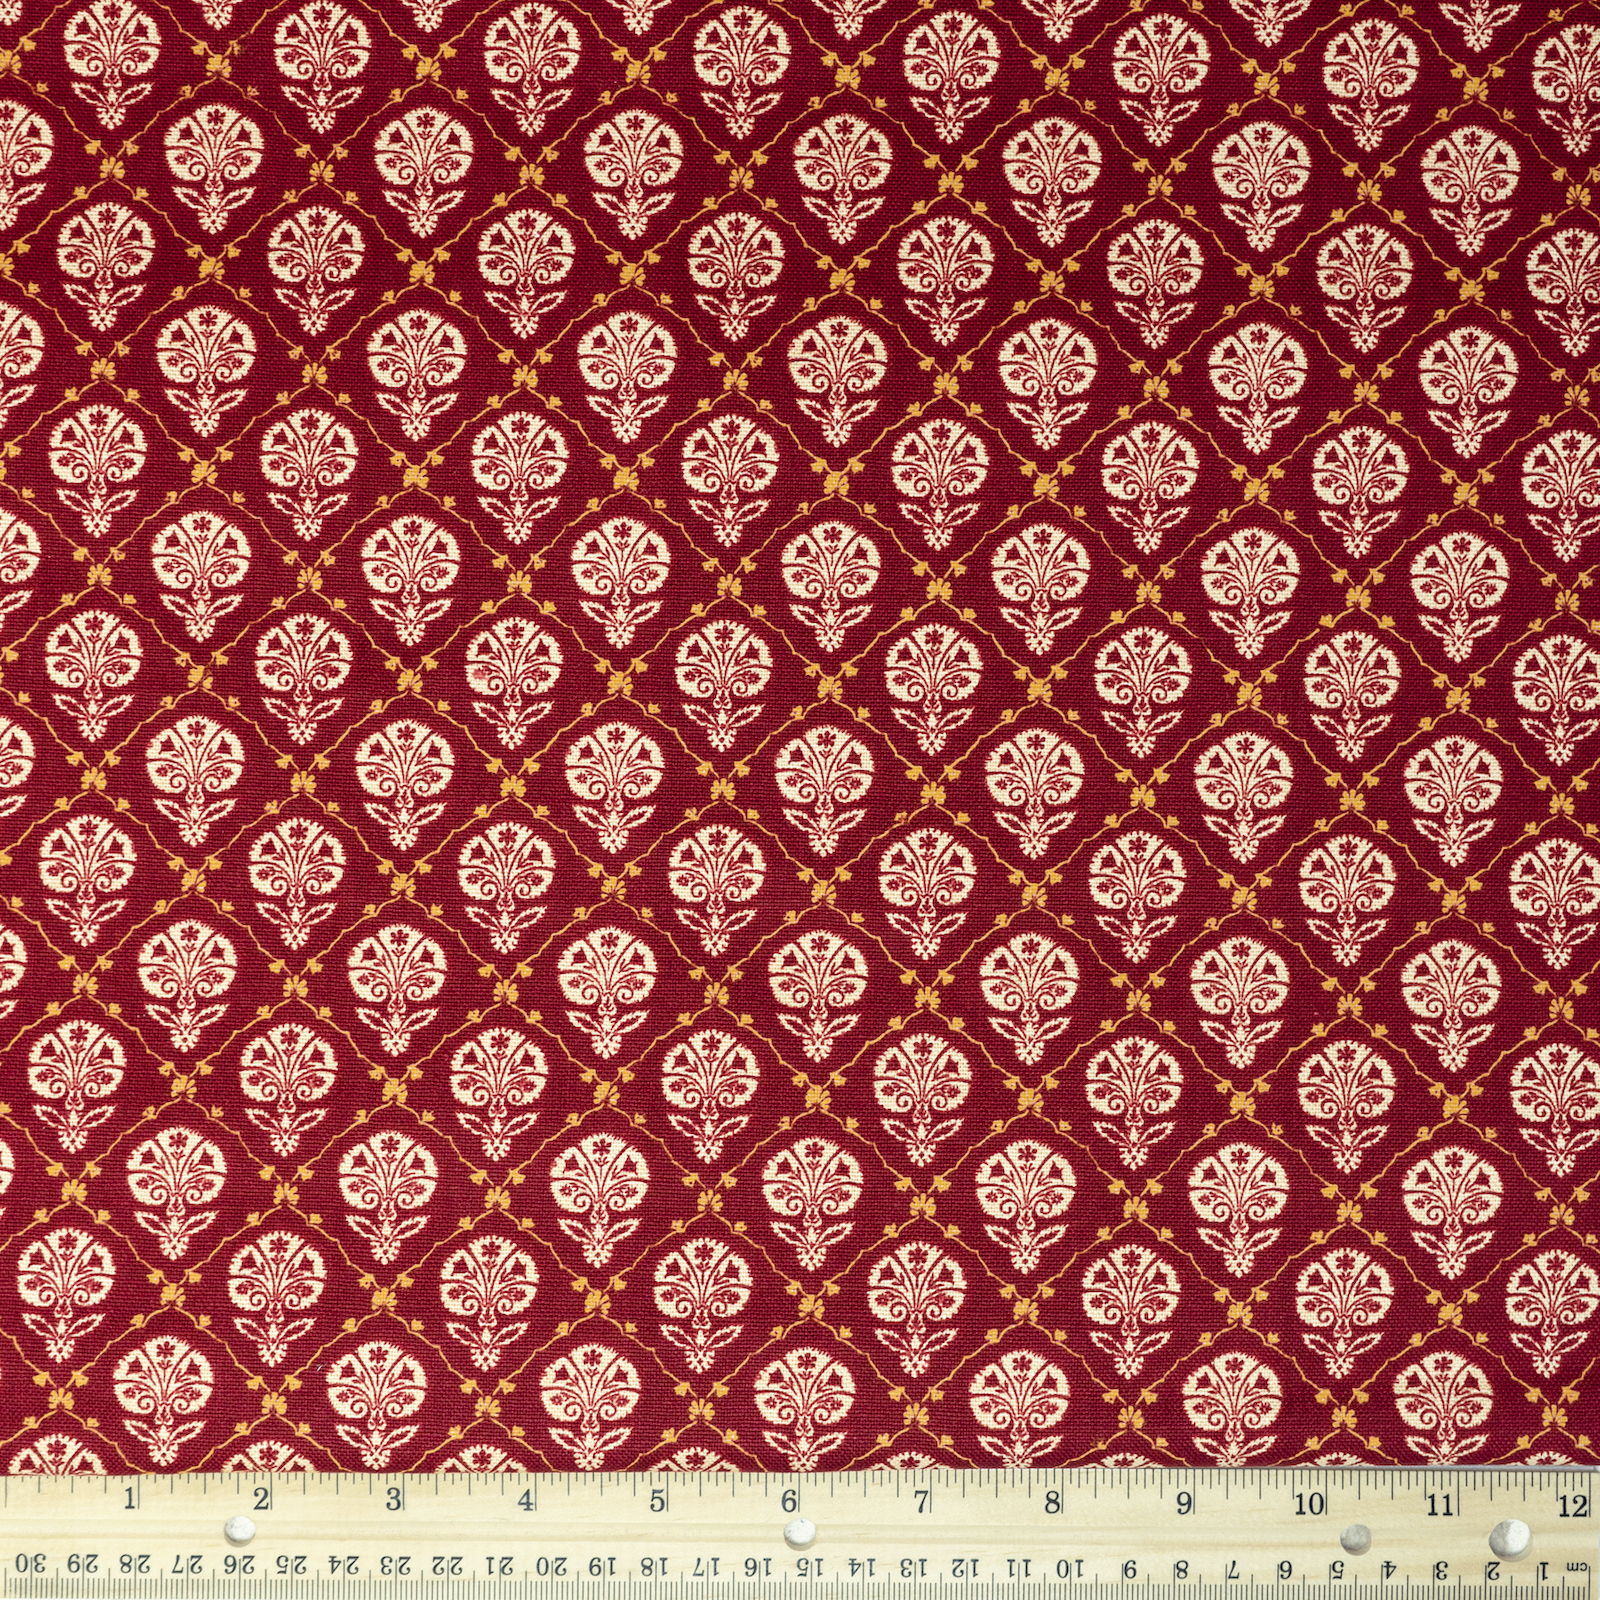 Quilting Fabric Red Fabric in Shop Fabric By Color 